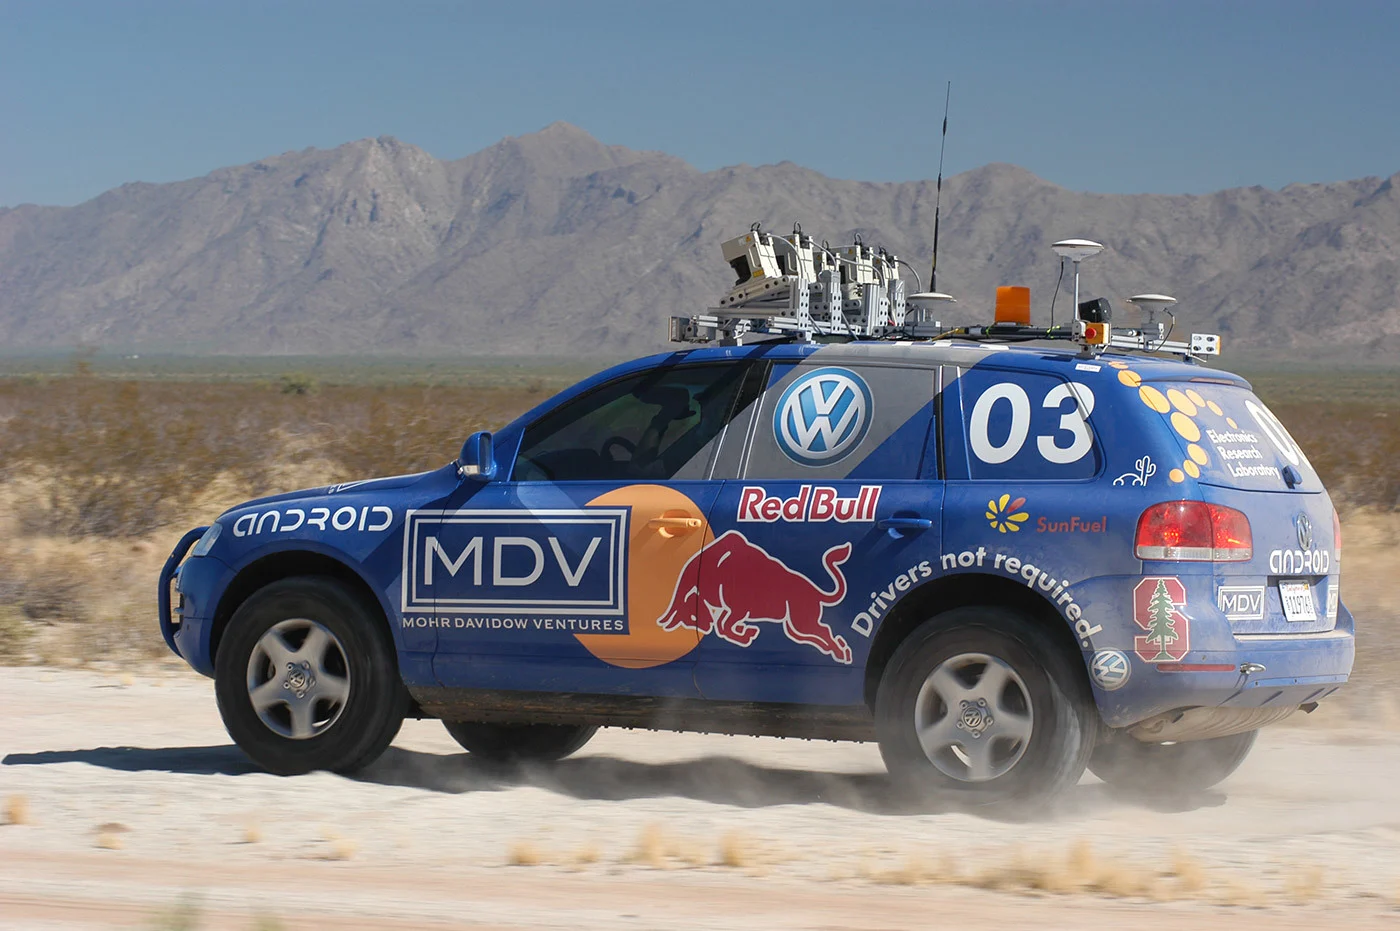 DARPA first conducted its Grand Challenge for self-driving vehicles back in 2004. That year, no teams successfully finished its Mojave Desert course. But in 2005, the Stanford Racing Team's VW Touareg named Stanley won. This vehicle carried more than just cameras: It included laser rangefinders, radar for long-range sight, GPS sensors and several Pentium M motherboards in a rugged rack mount.
